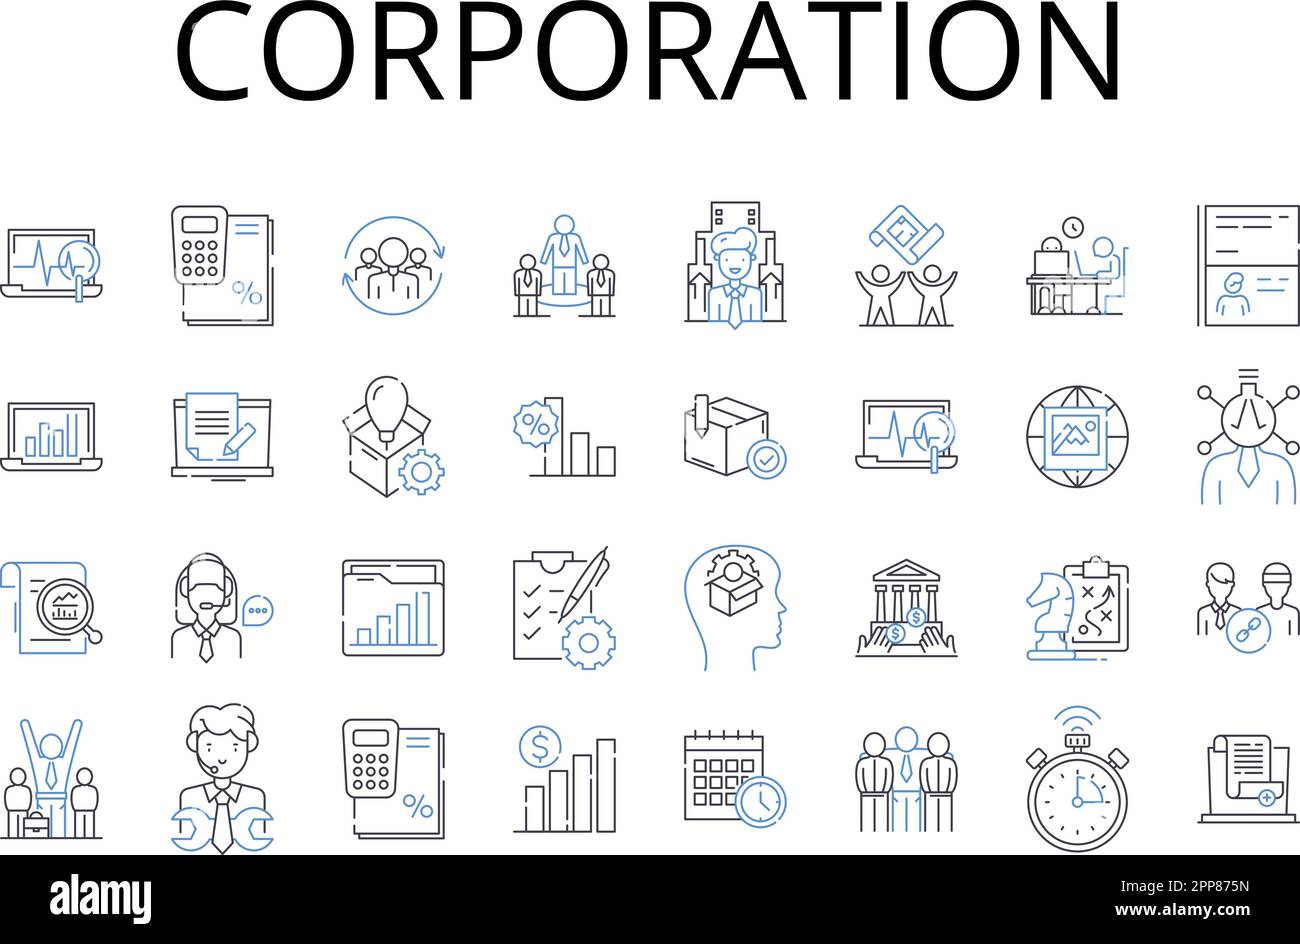 Corporation line icons collection. Business entity, Conglomerate, Company group, Commercial enterprise, Concern organization, Inc undertaking, Joint Stock Vector